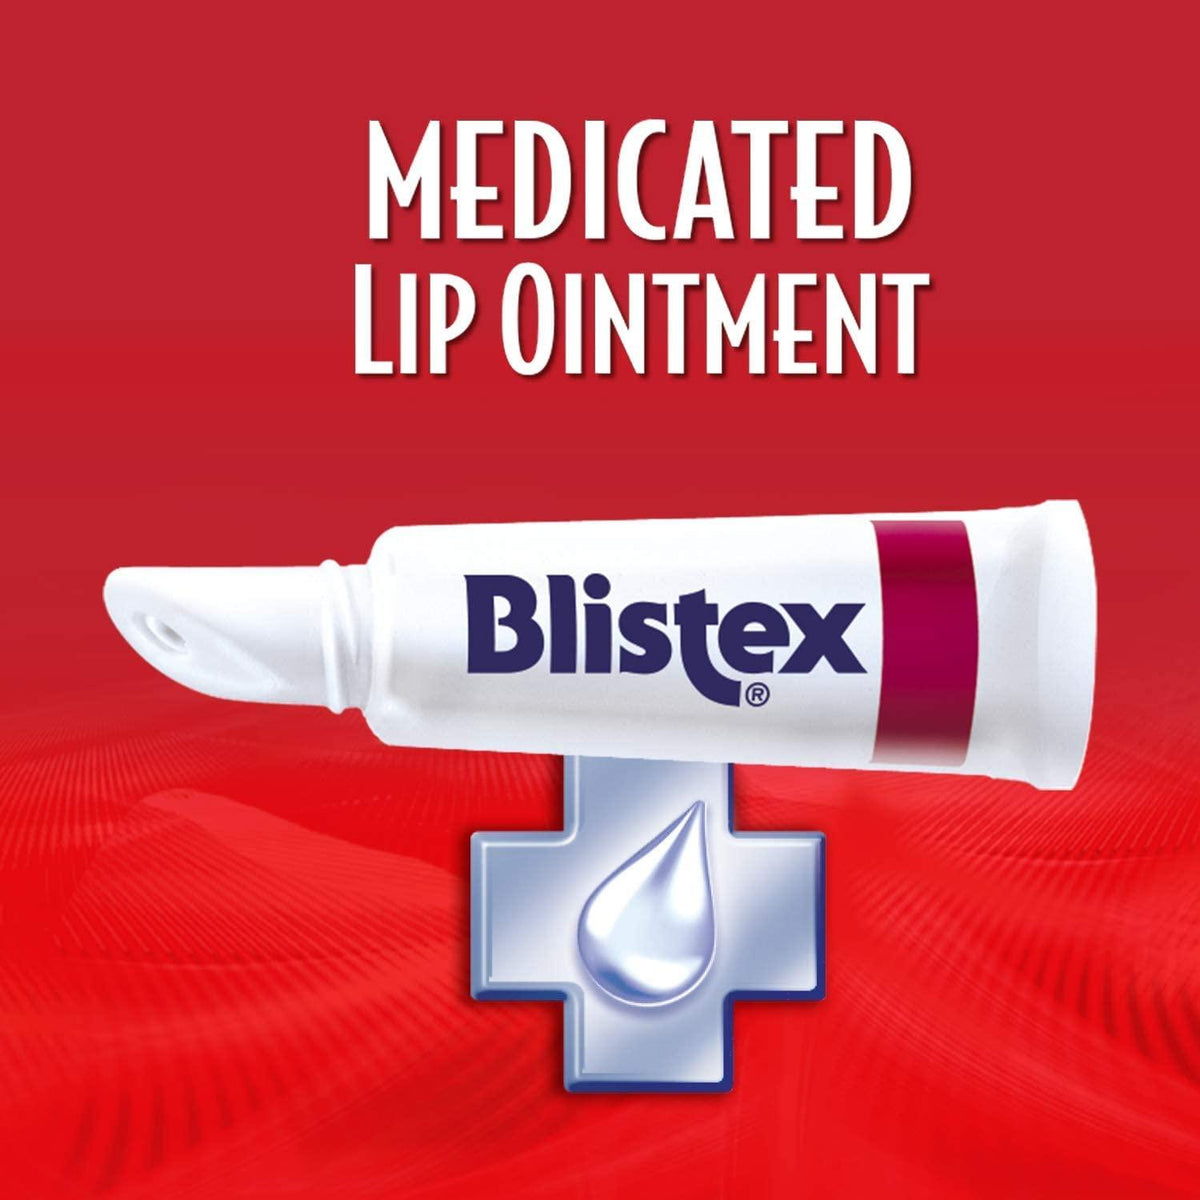 Blistex - Medicated Lip Ointment 2 Tubes Each 6gm